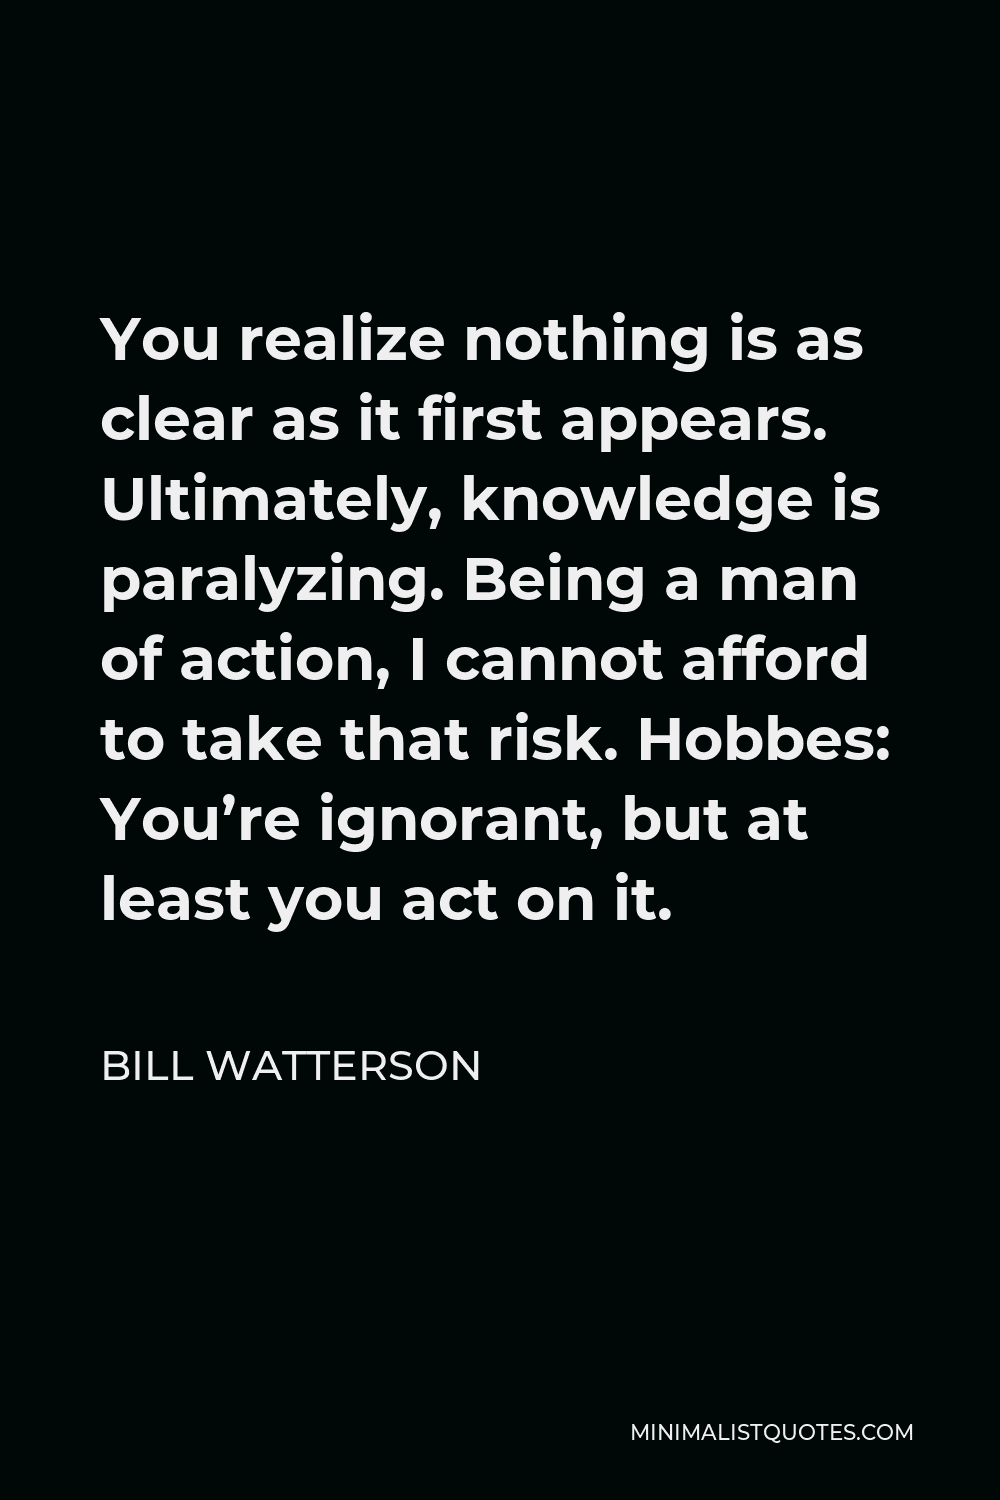 Bill Watterson Quote - You realize nothing is as clear as it first appears. Ultimately, knowledge is paralyzing. Being a man of action, I cannot afford to take that risk. Hobbes: You’re ignorant, but at least you act on it.